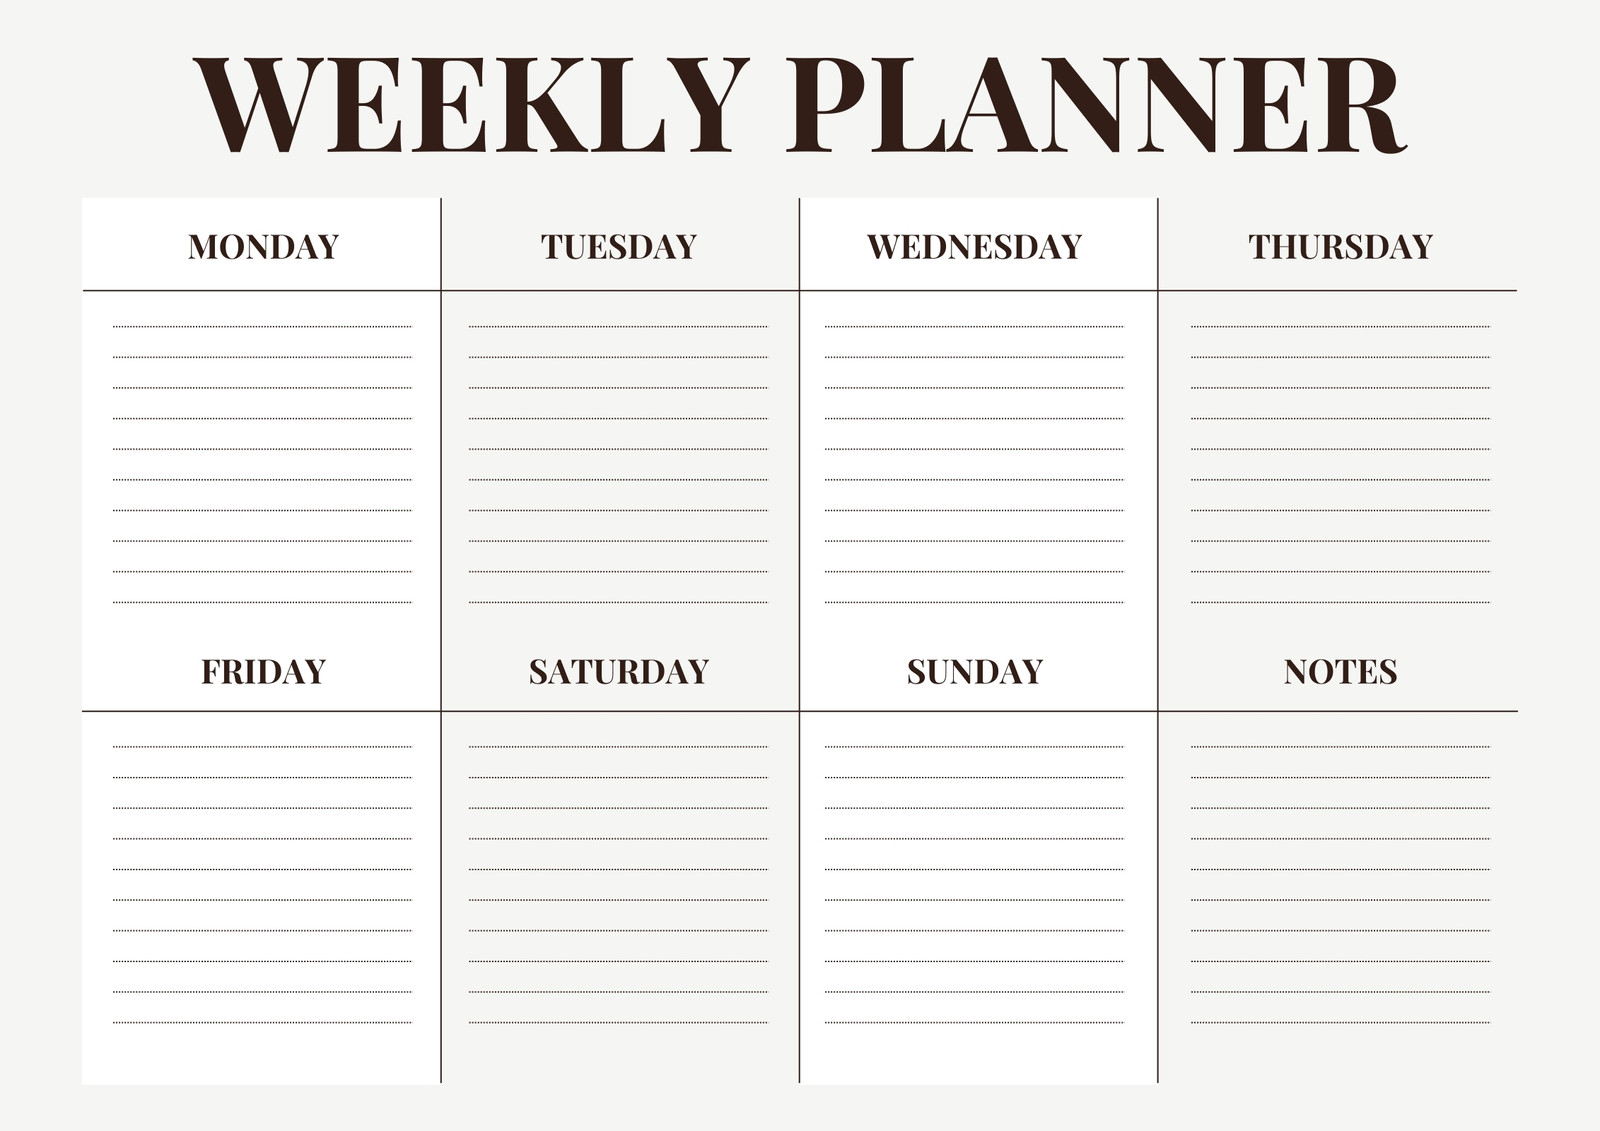 Cute Weekly Kitty Planner -   Daily planner template, Study planner,  Study planner printable